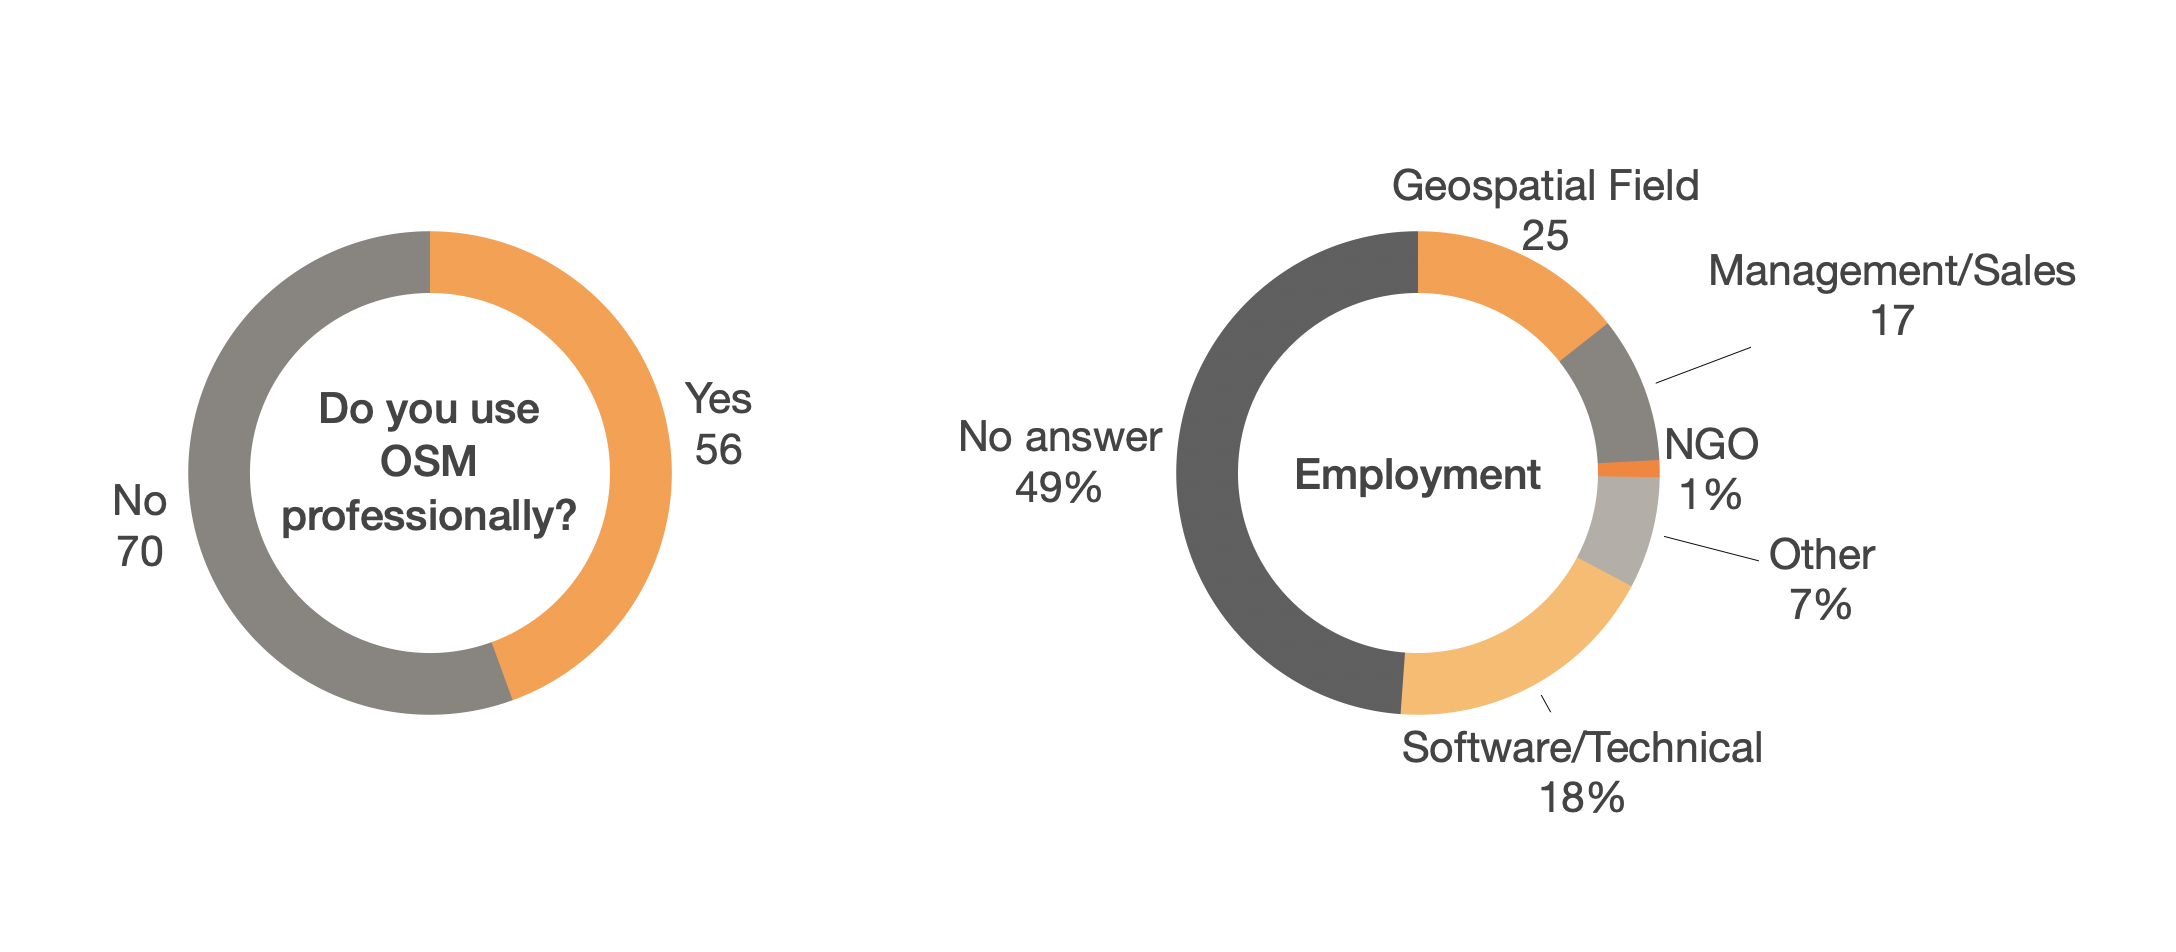 56 respondents said they used OSM professionally